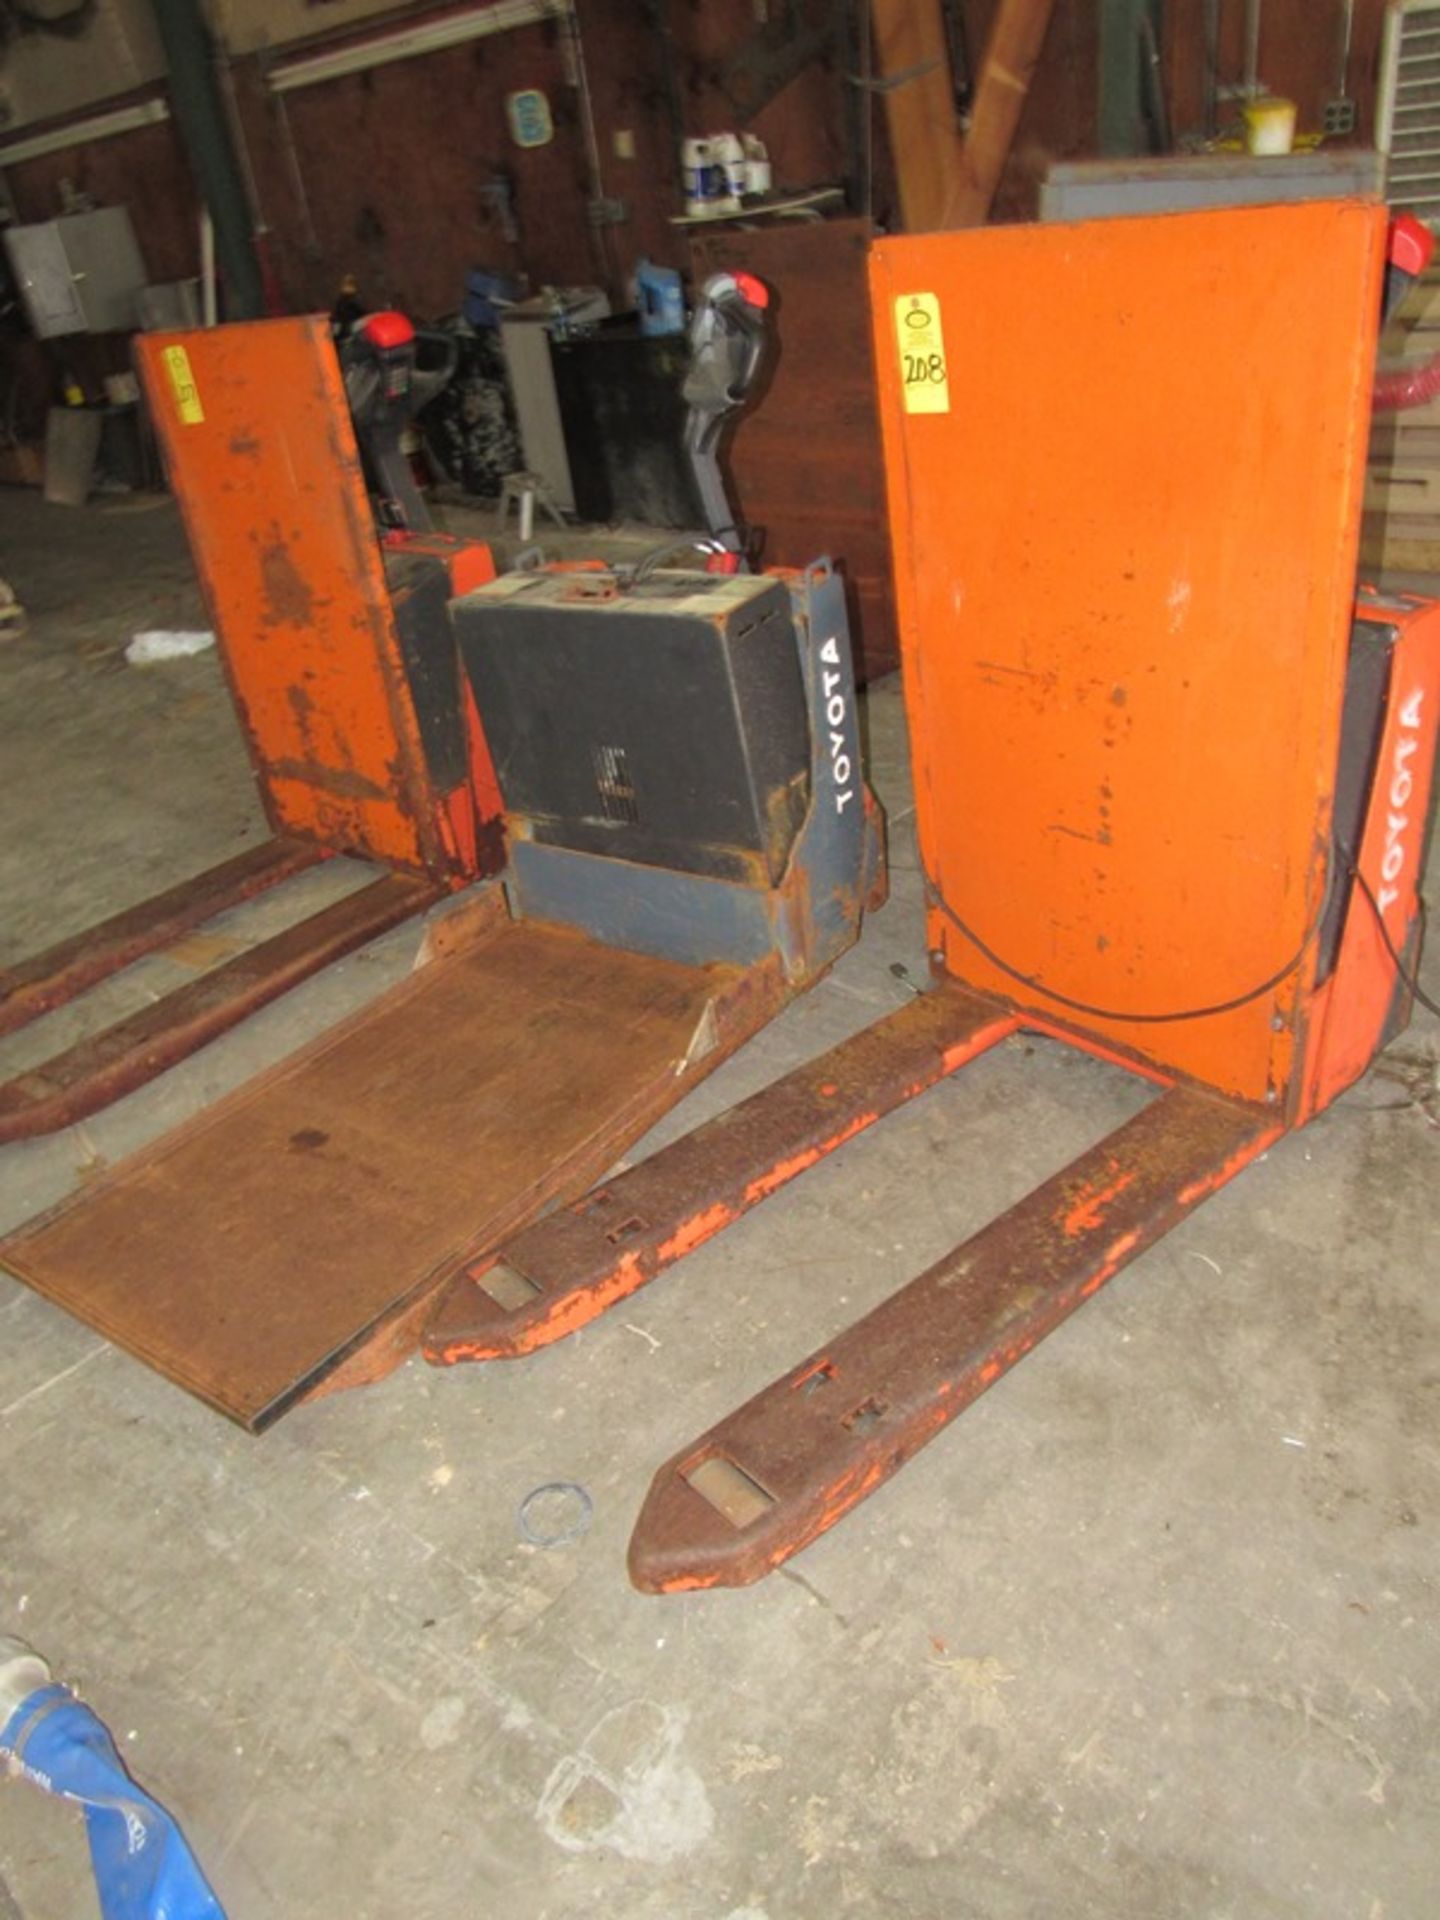 Lot of (2) Toyota Electric Pallet Jacks, 24 volt, on board chargers (Required Loading Fee $200.00